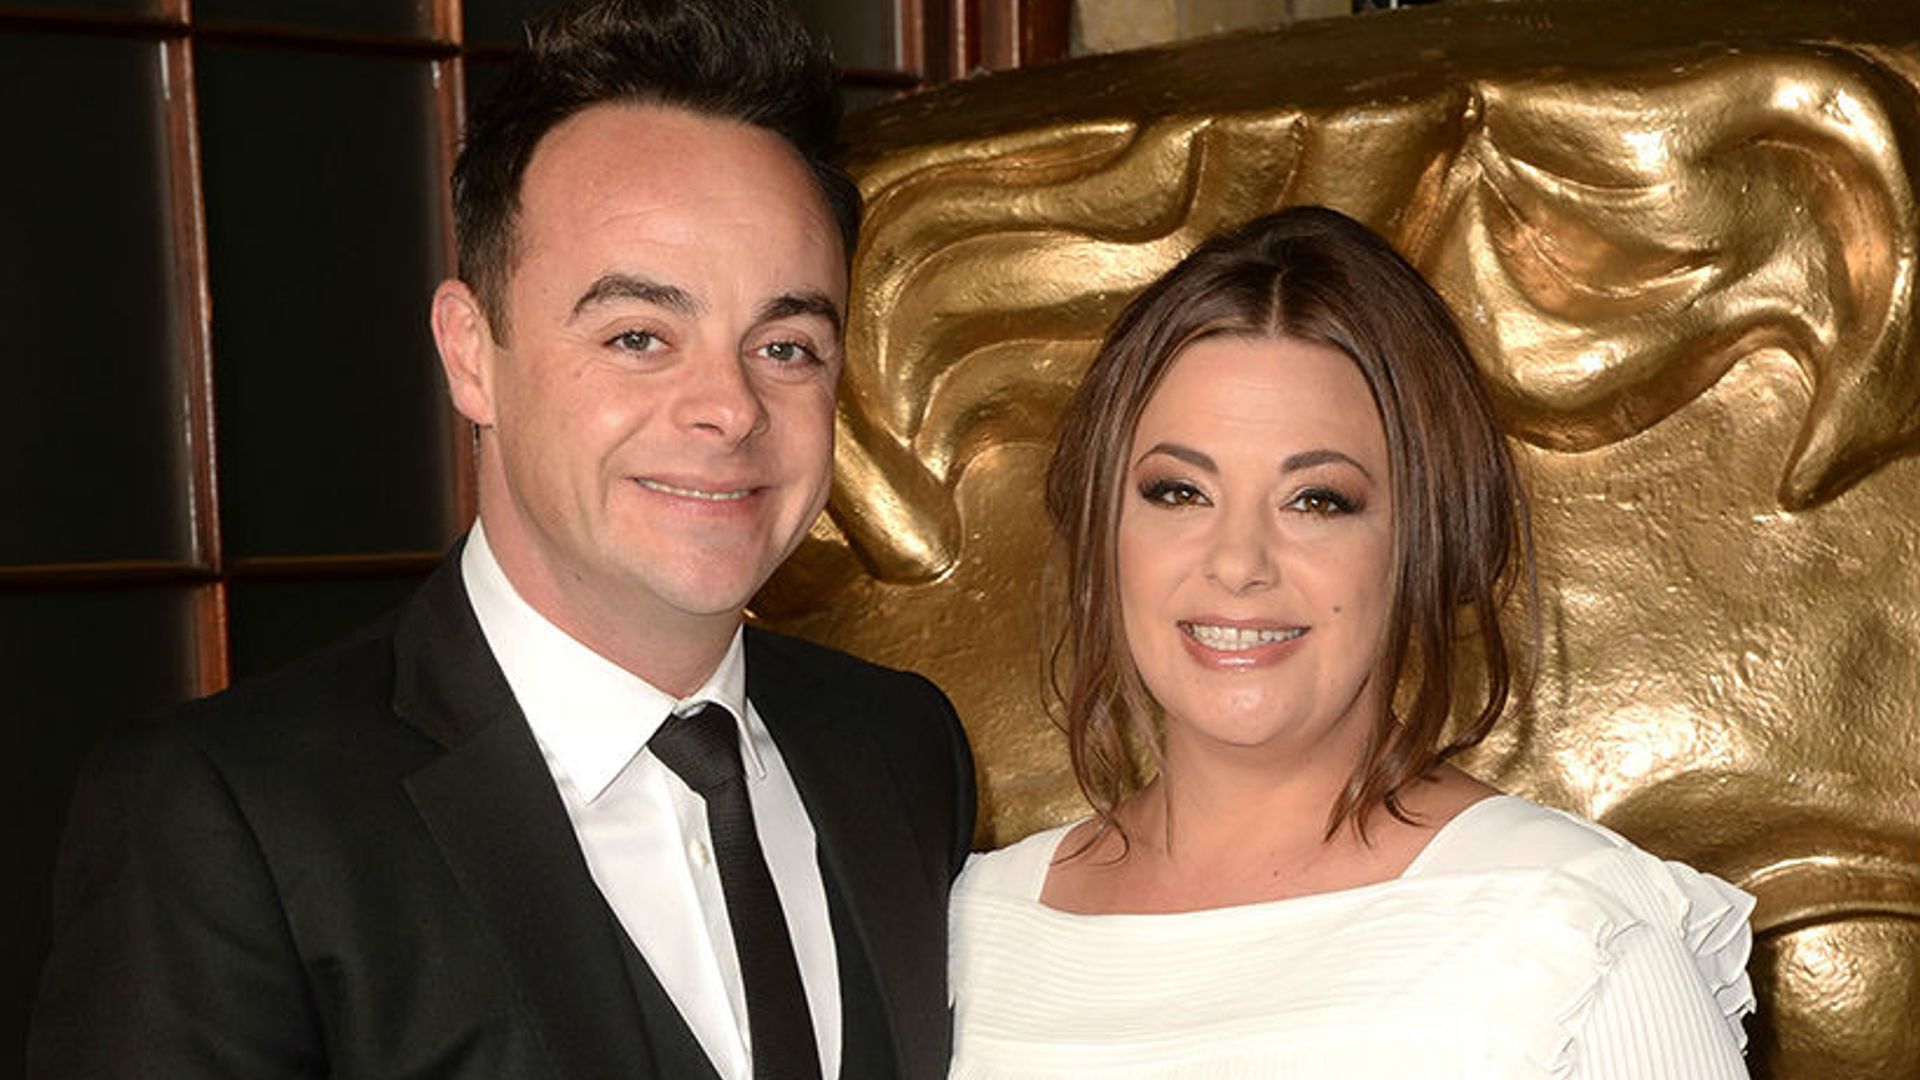 Lisa Armstrong speaks out after Ant's 'tough year' speech at NTAs